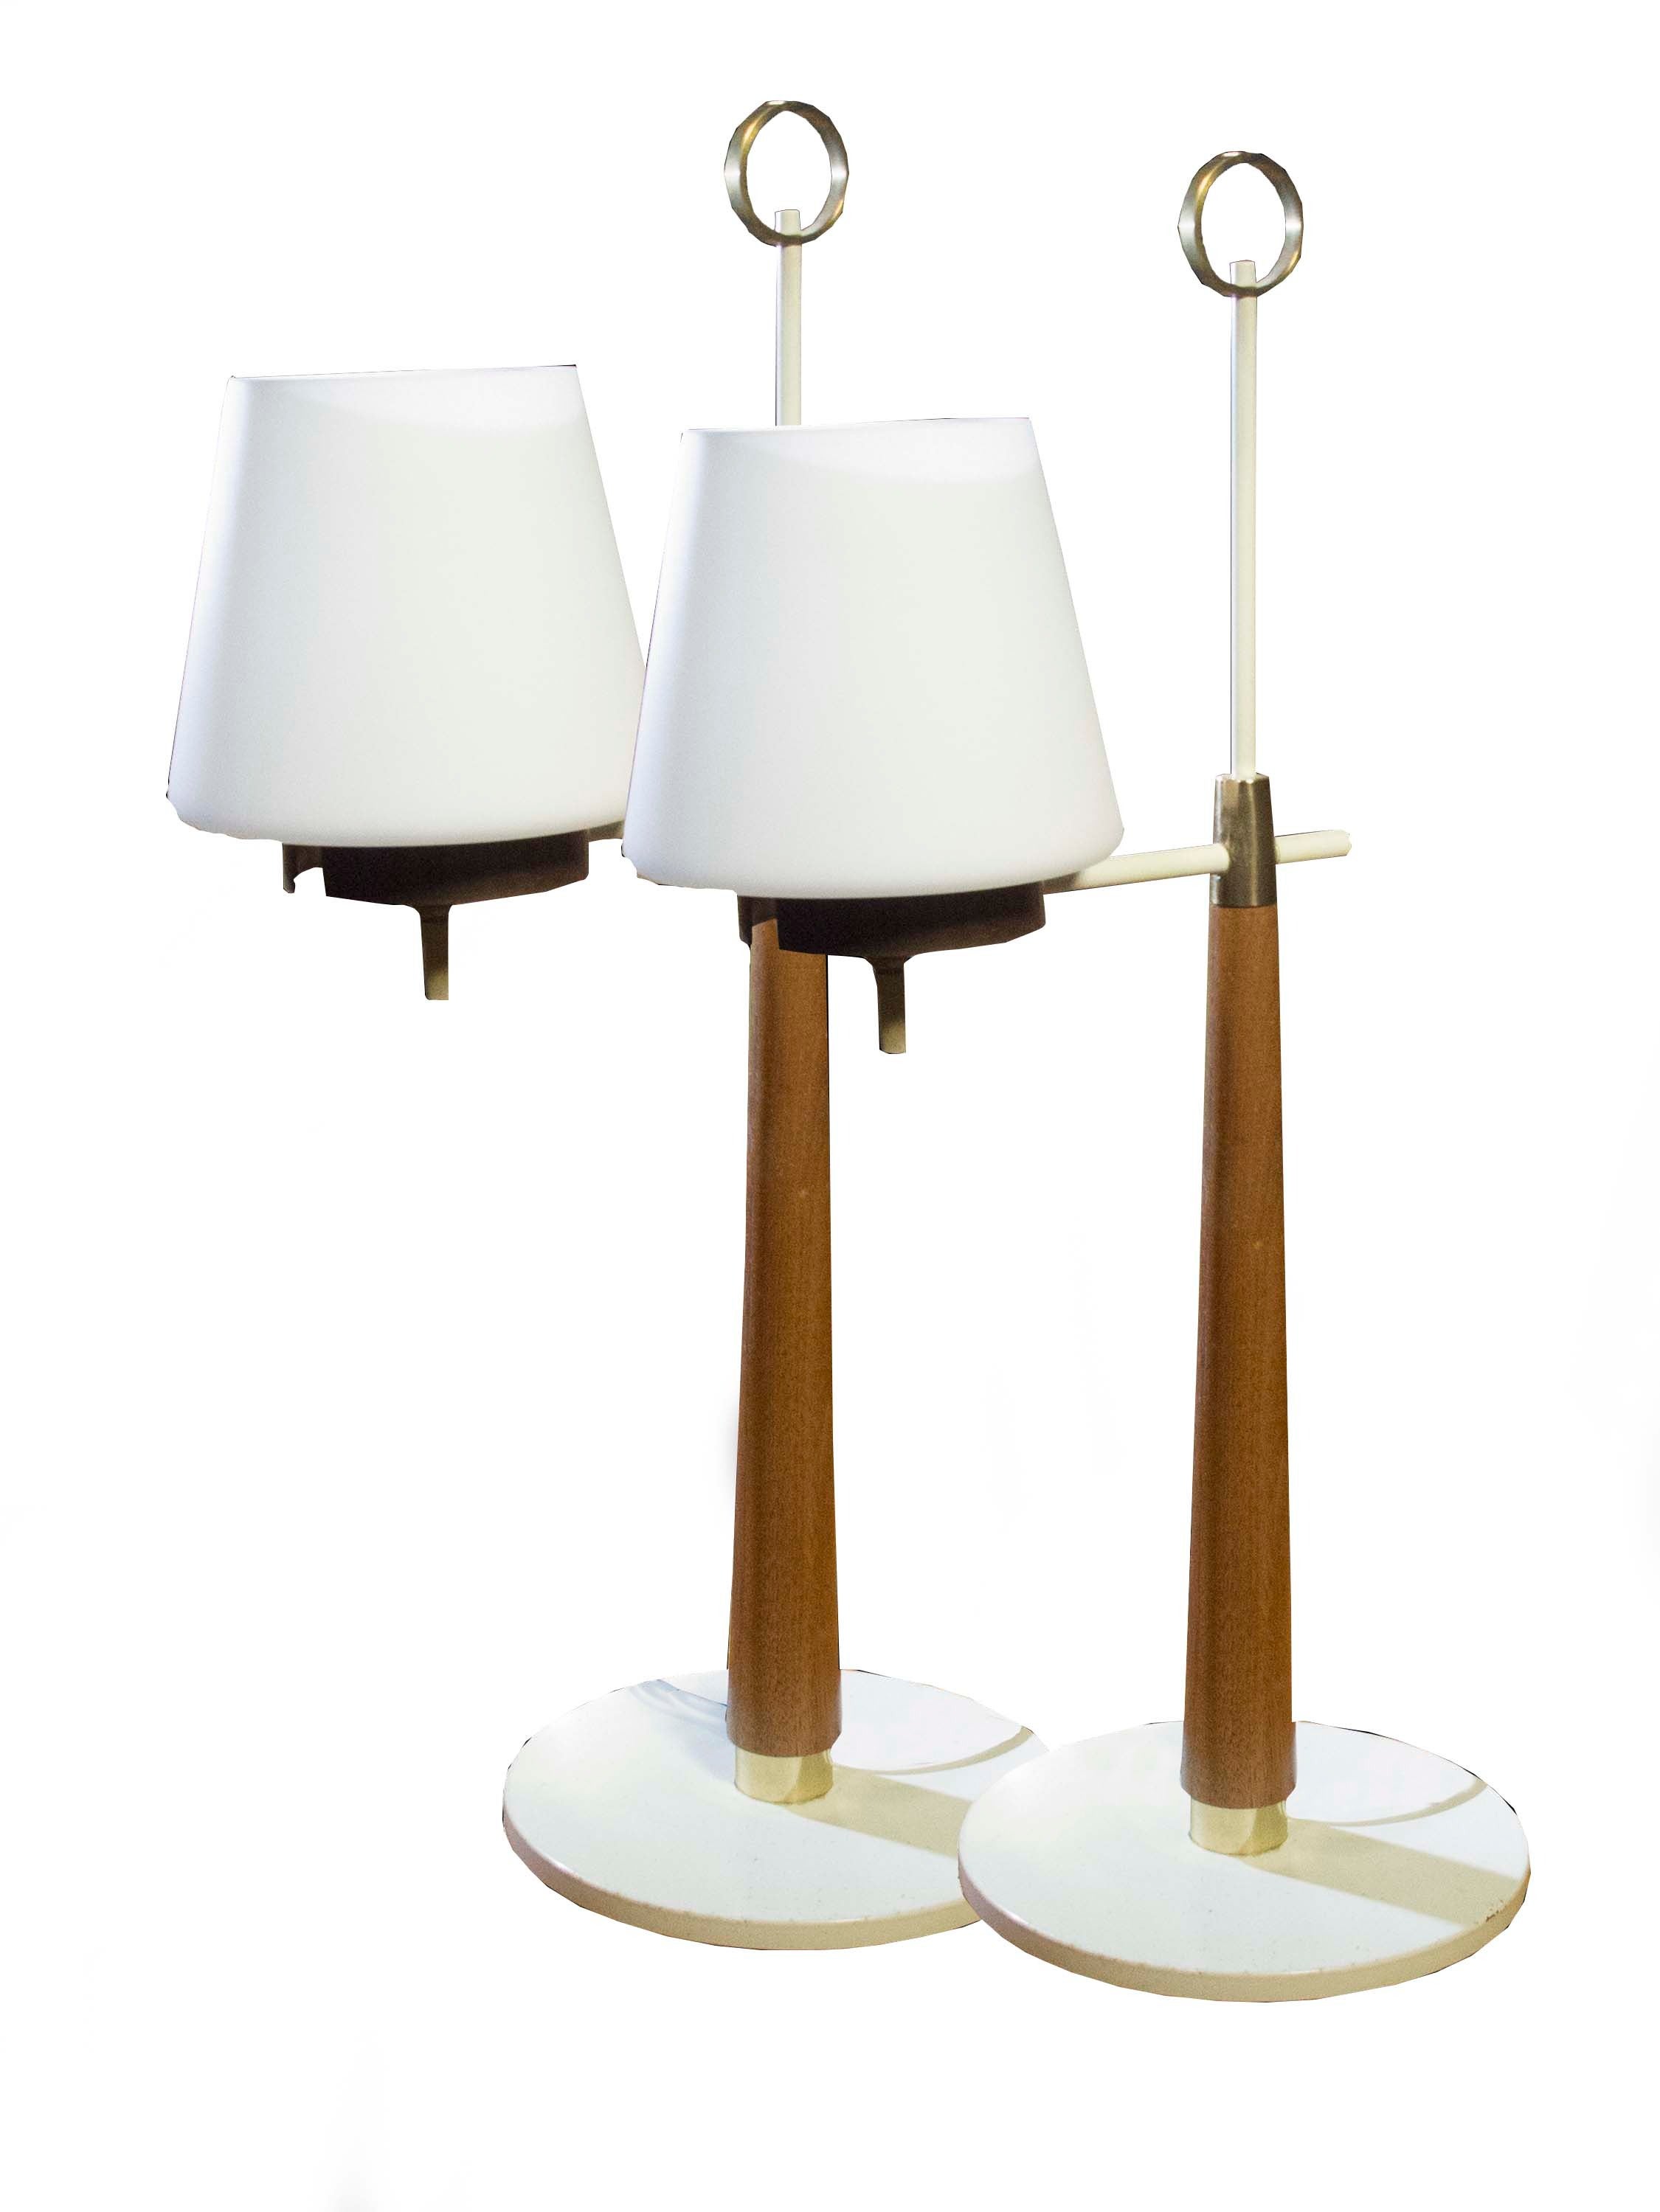 Pair of Gerald Thurston for Lightolier Lamps, Mid-20th Century For Sale